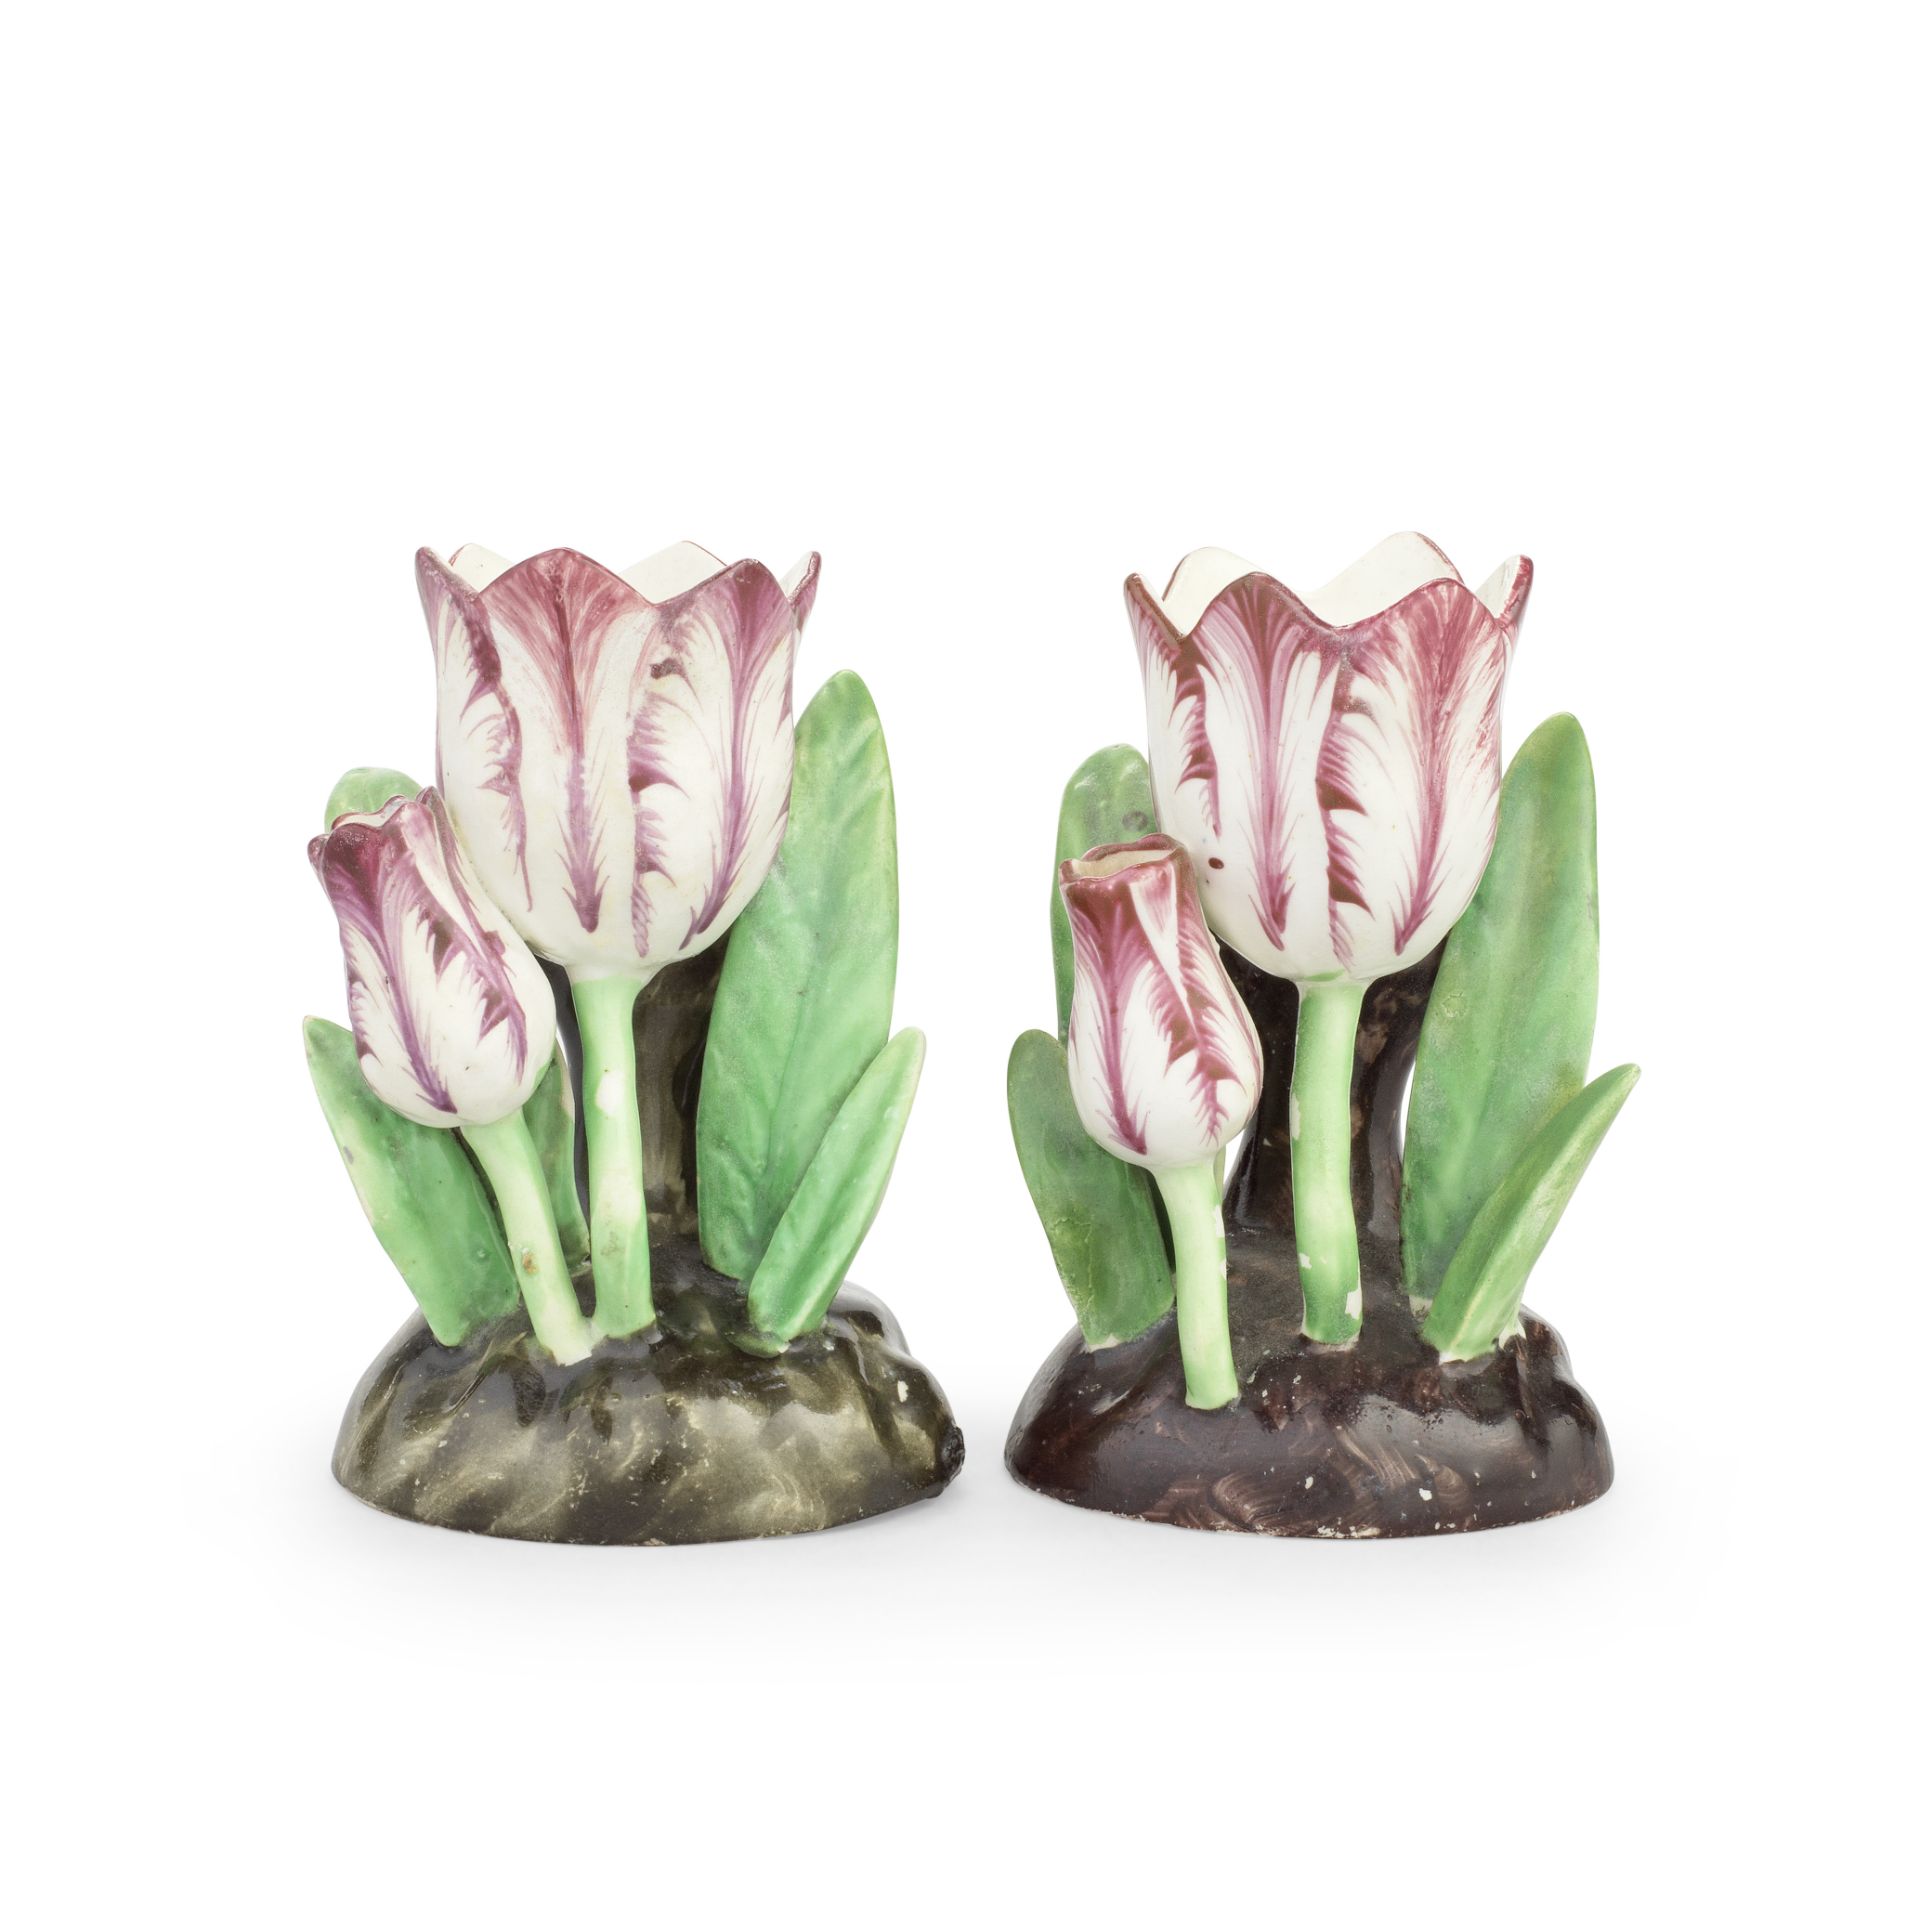 A near pair of small Staffordshire porcelain tulip vases, circa 1840